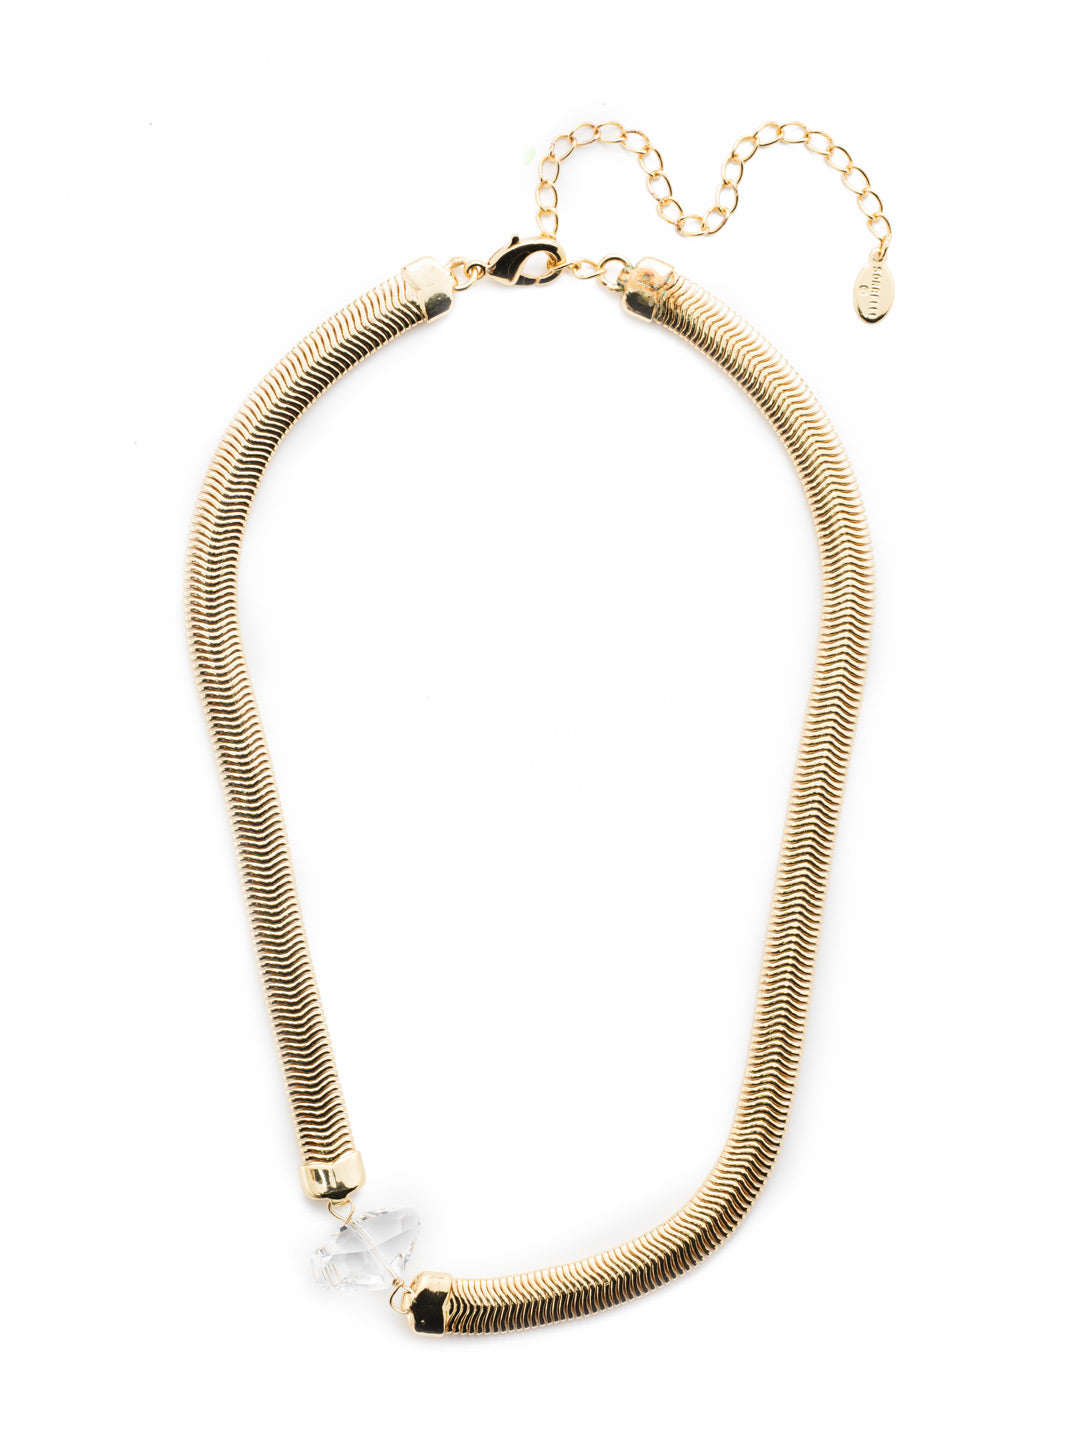 Raven Tennis Necklace - 4NEU50BGCRY - Snakechain lovers: this is your must-have. Showcase your edge in our Raven Tennis Necklace featuring an off-center crystal sparkler. From Sorrelli's Crystal collection in our Bright Gold-tone finish.